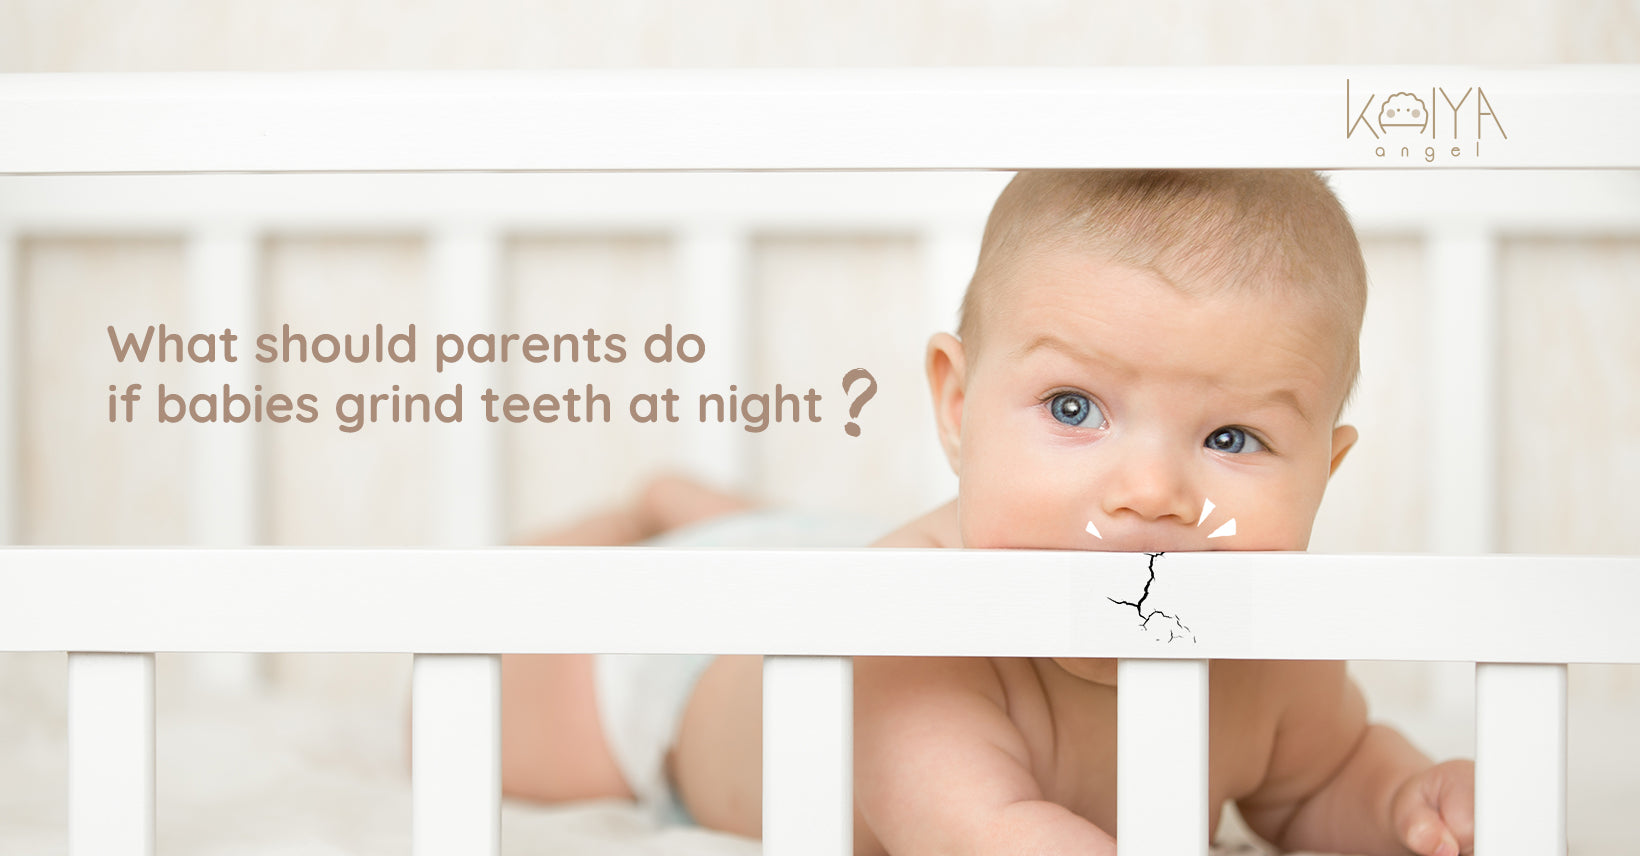 What should parents do if babies grind teeth at night